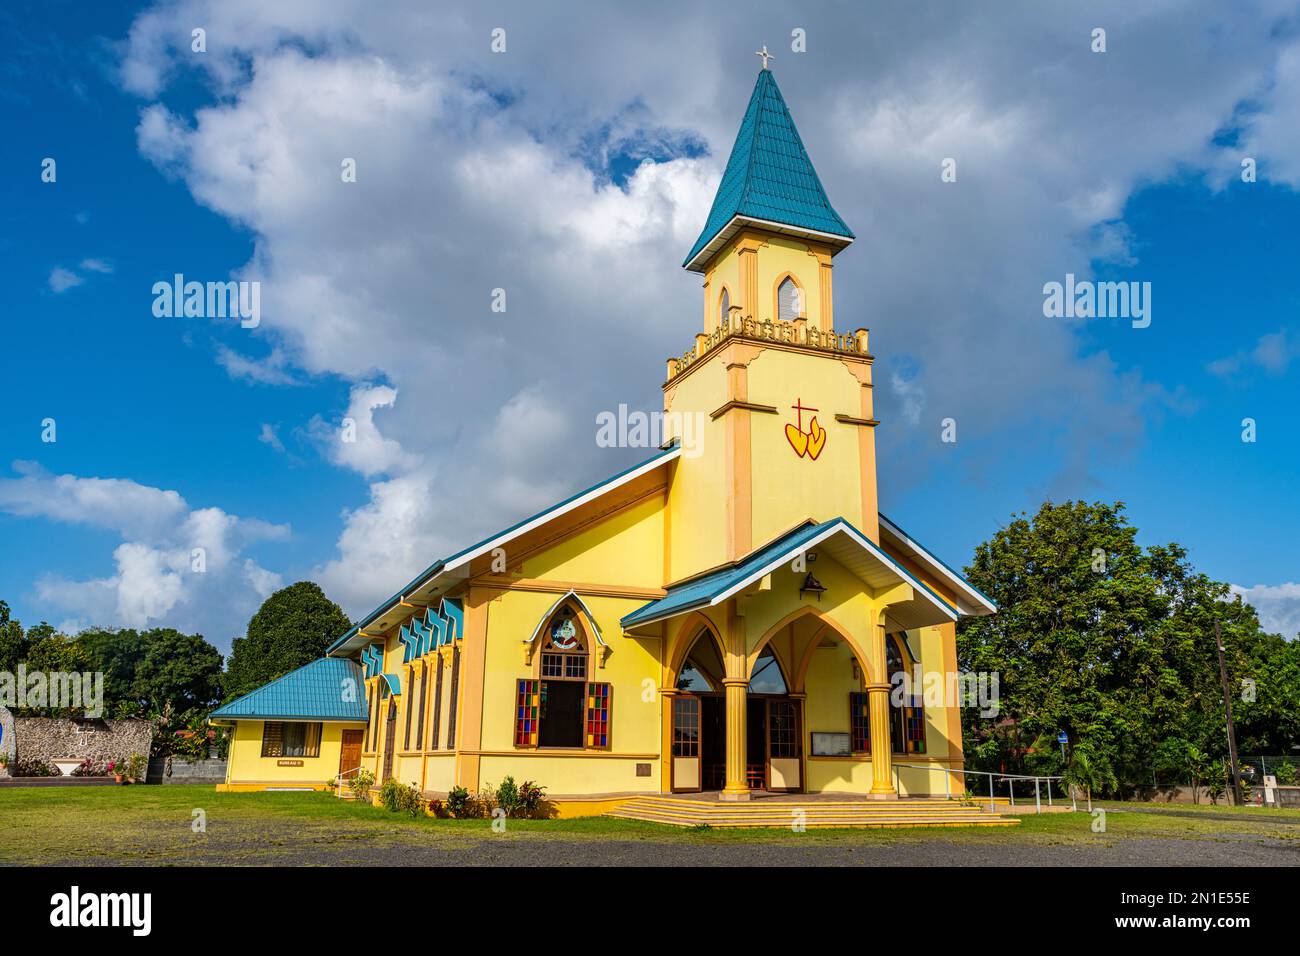 Yellow painted church, Tahiti, Society Islands, French Polynesia, South Pacific, Pacific Stock Photo